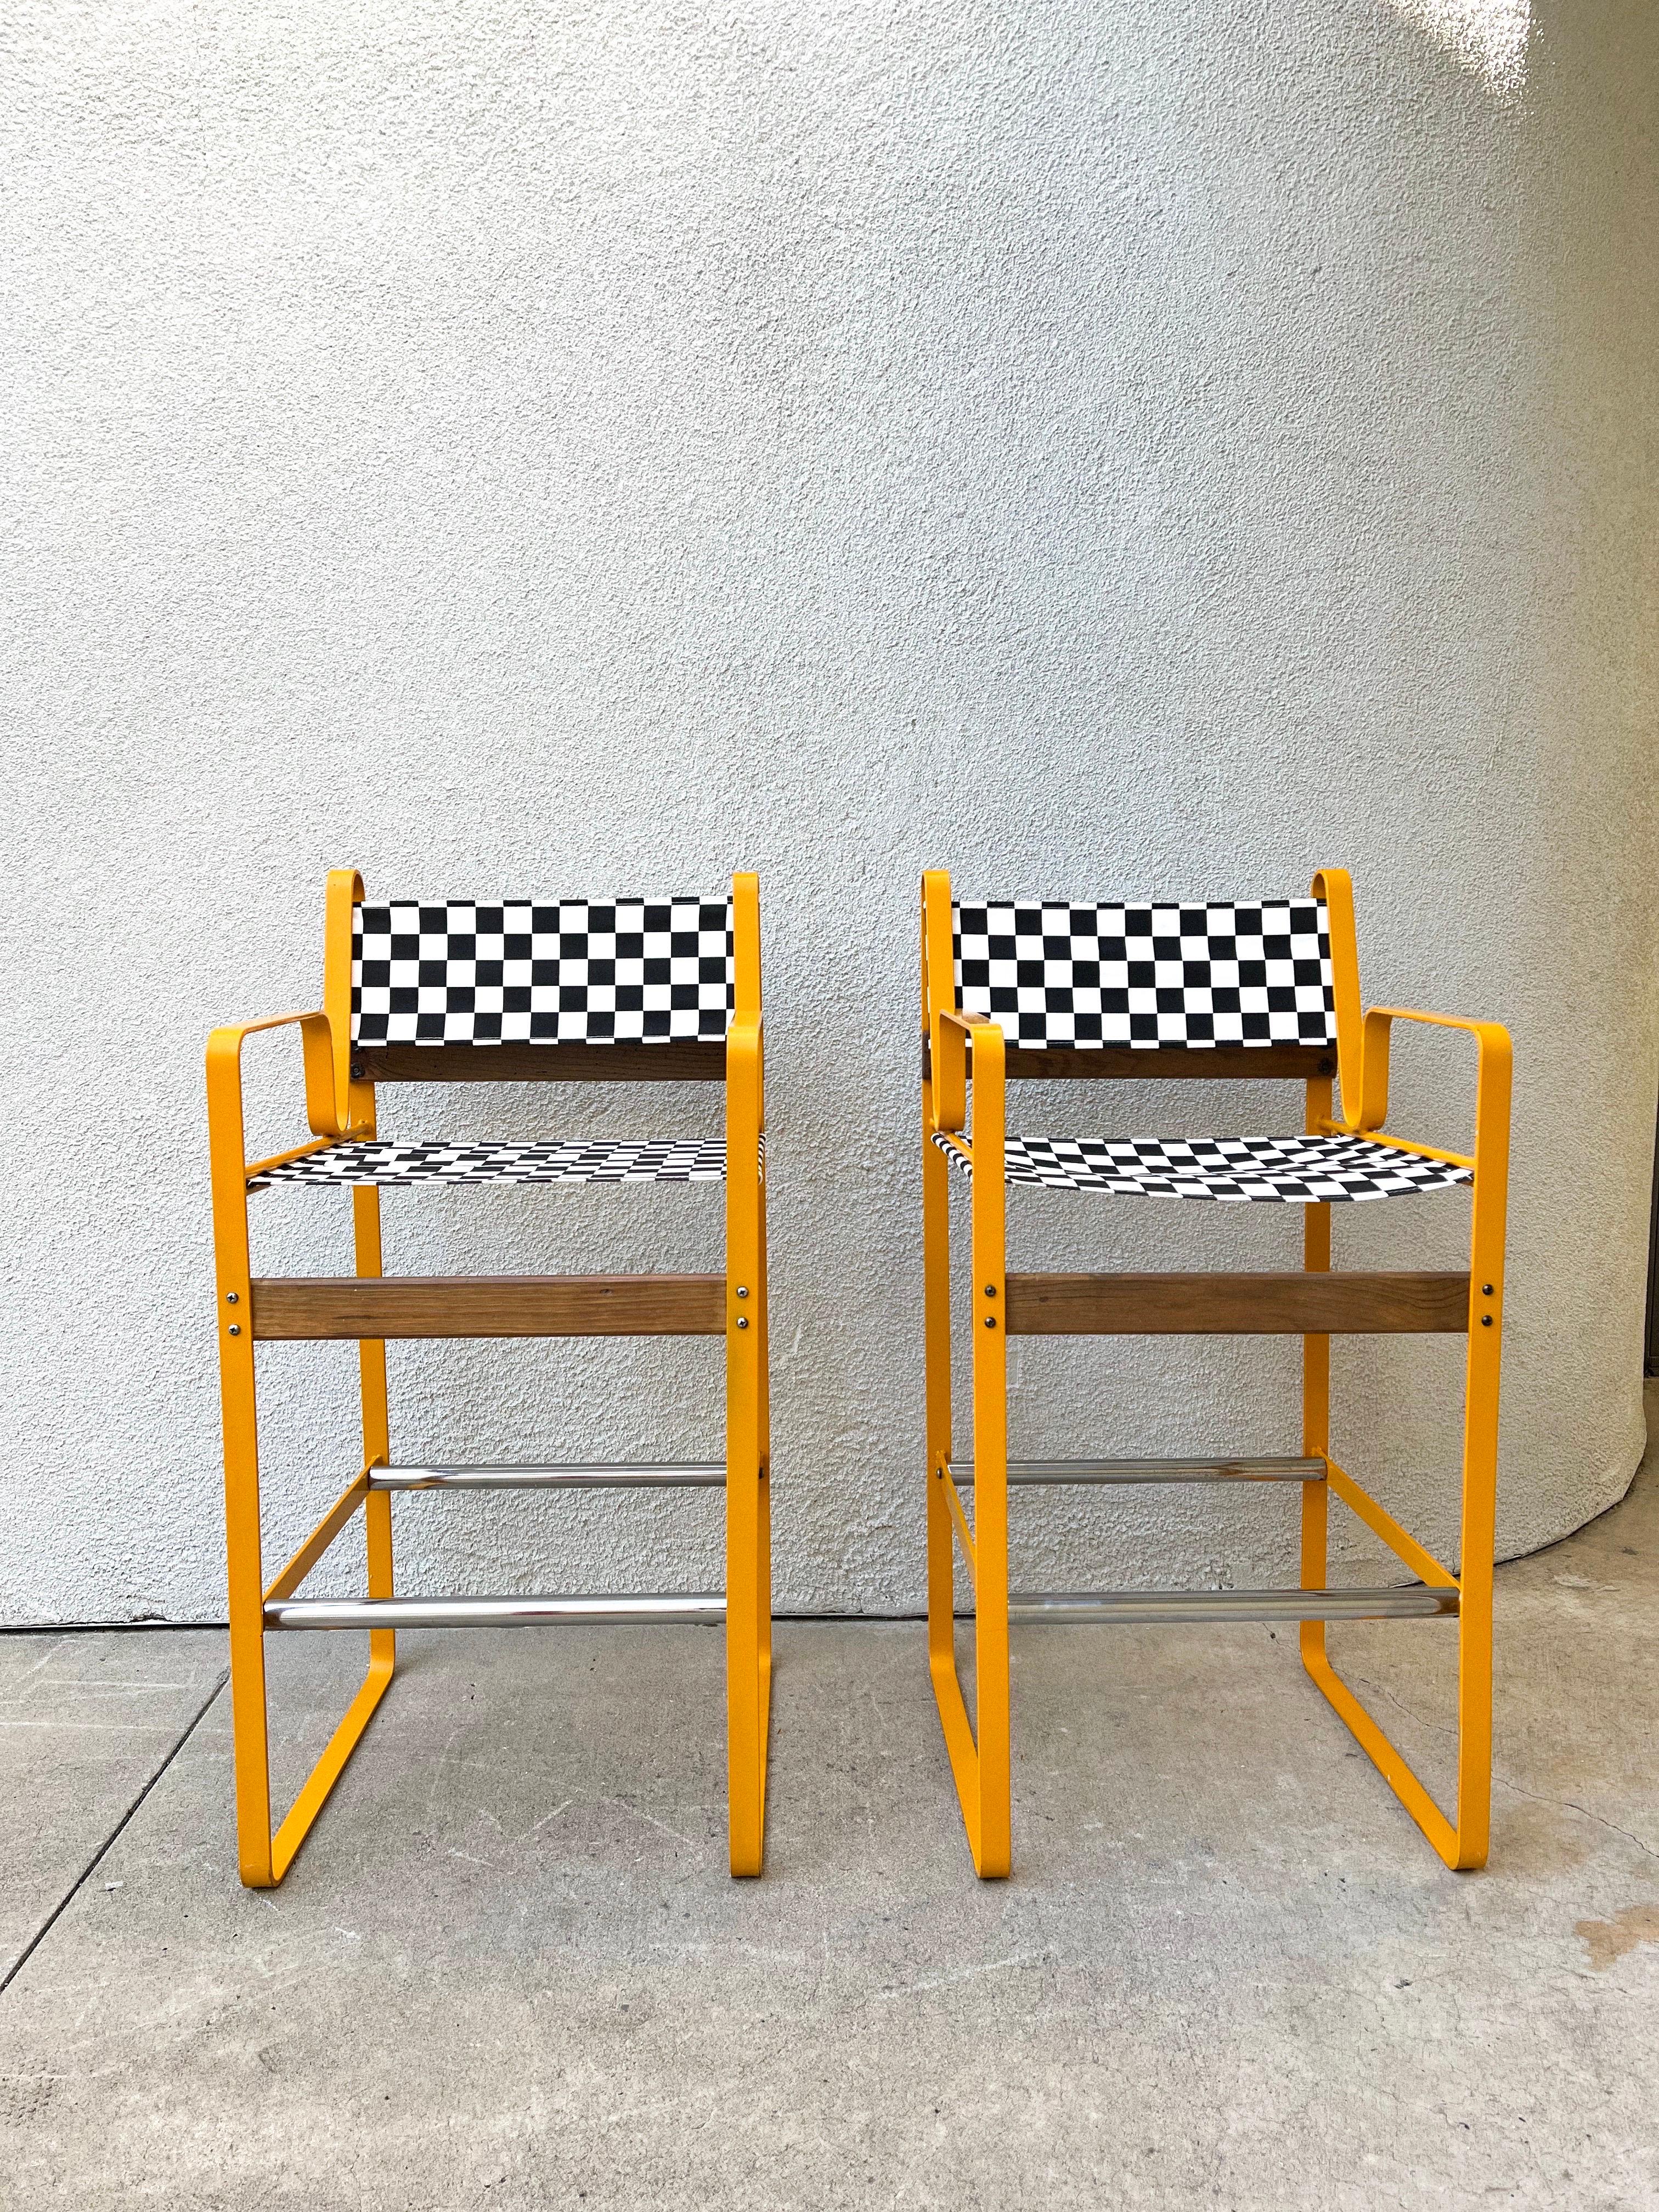 A pair of postmodern barstools in the manner of Bruno Pollak. These stools feature a very sturdy metal frame coated in orange, chrome footrests and wooden support bars. Seats and backs are brand new cotton canvas in a black and white checkered